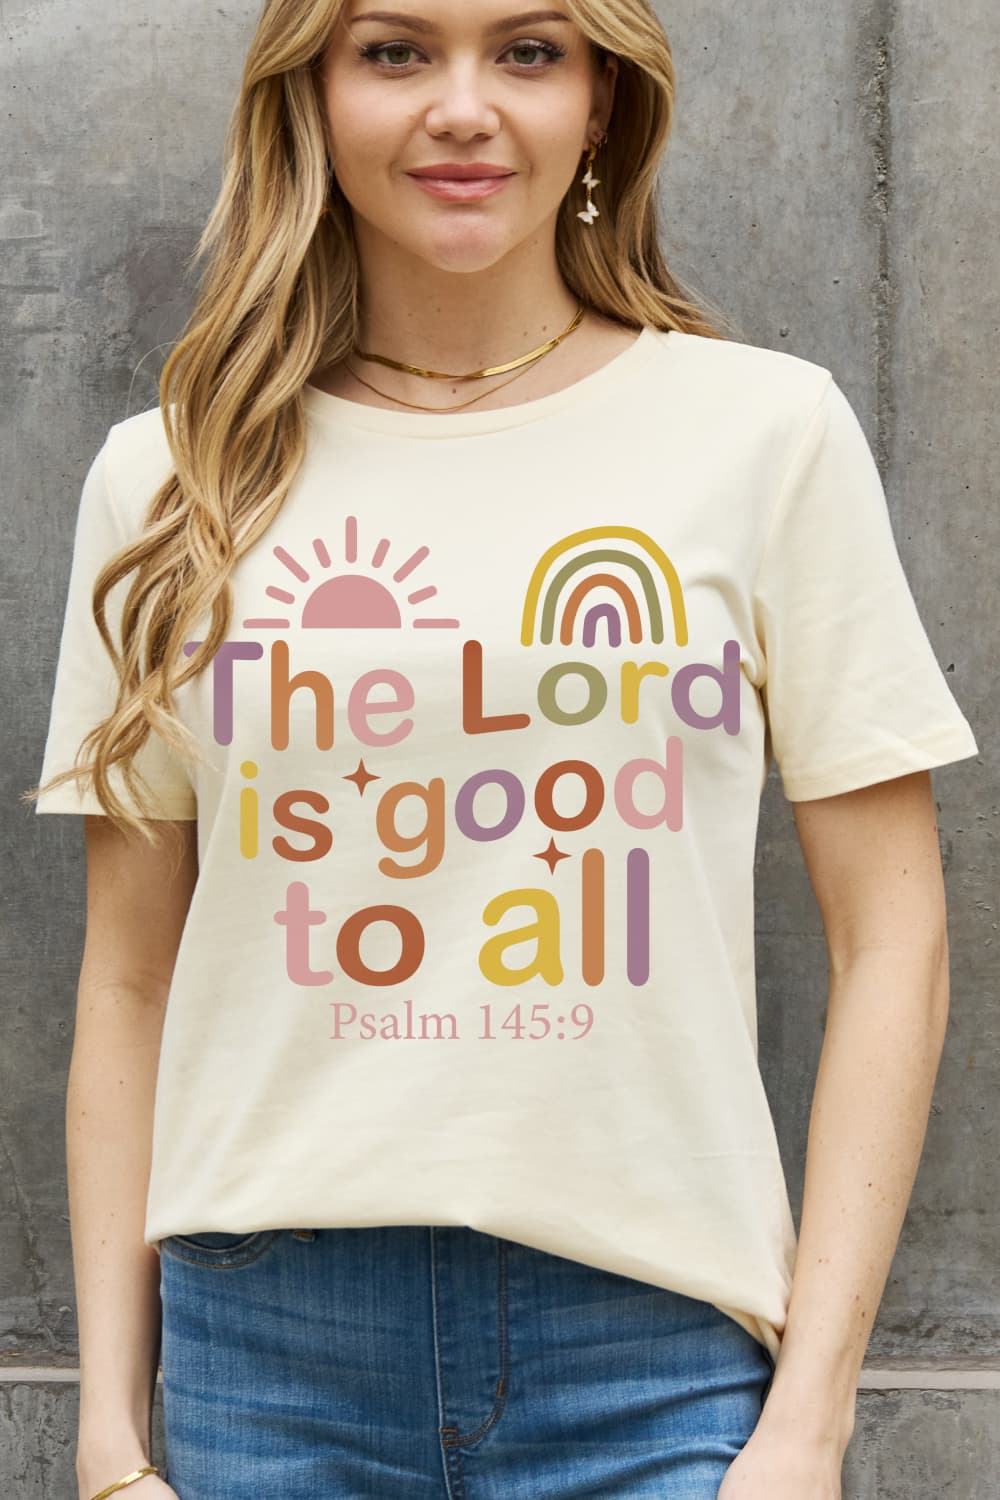 Full Size The Lord is Good to All Psalm 145:9 Graphic Cotton Tee Ivory